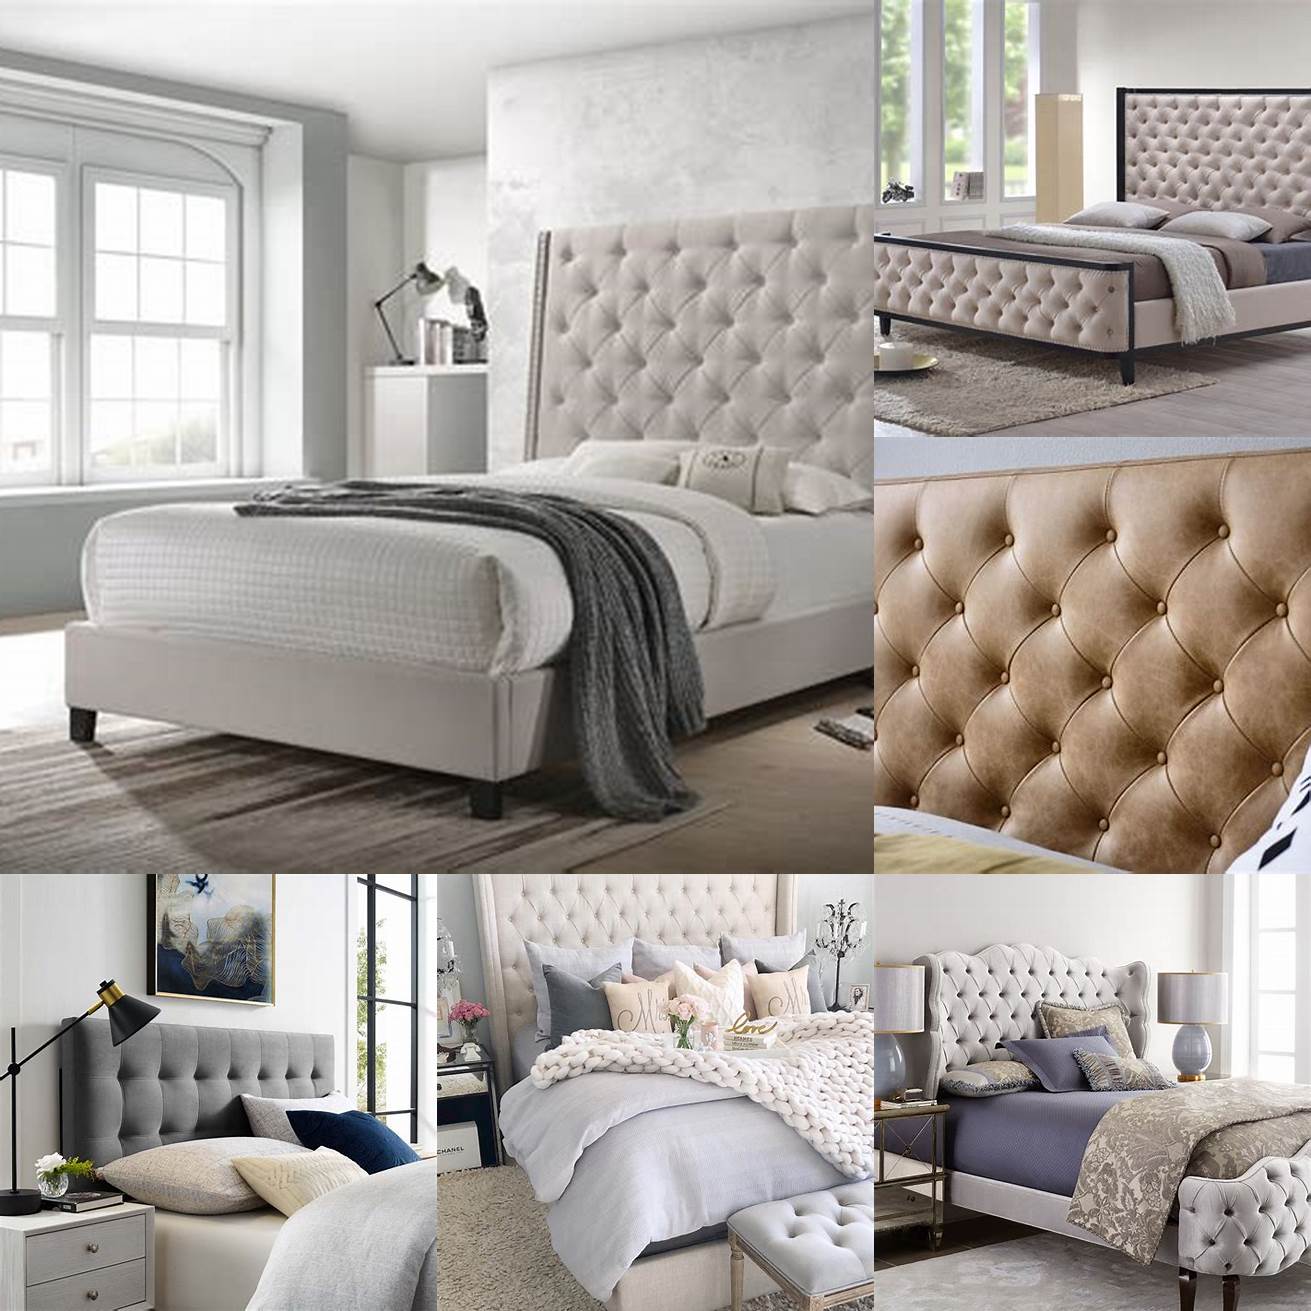 Think about the color and texture Tufted beds come in different colors and textures so choose one that matches your bedding and other furniture pieces